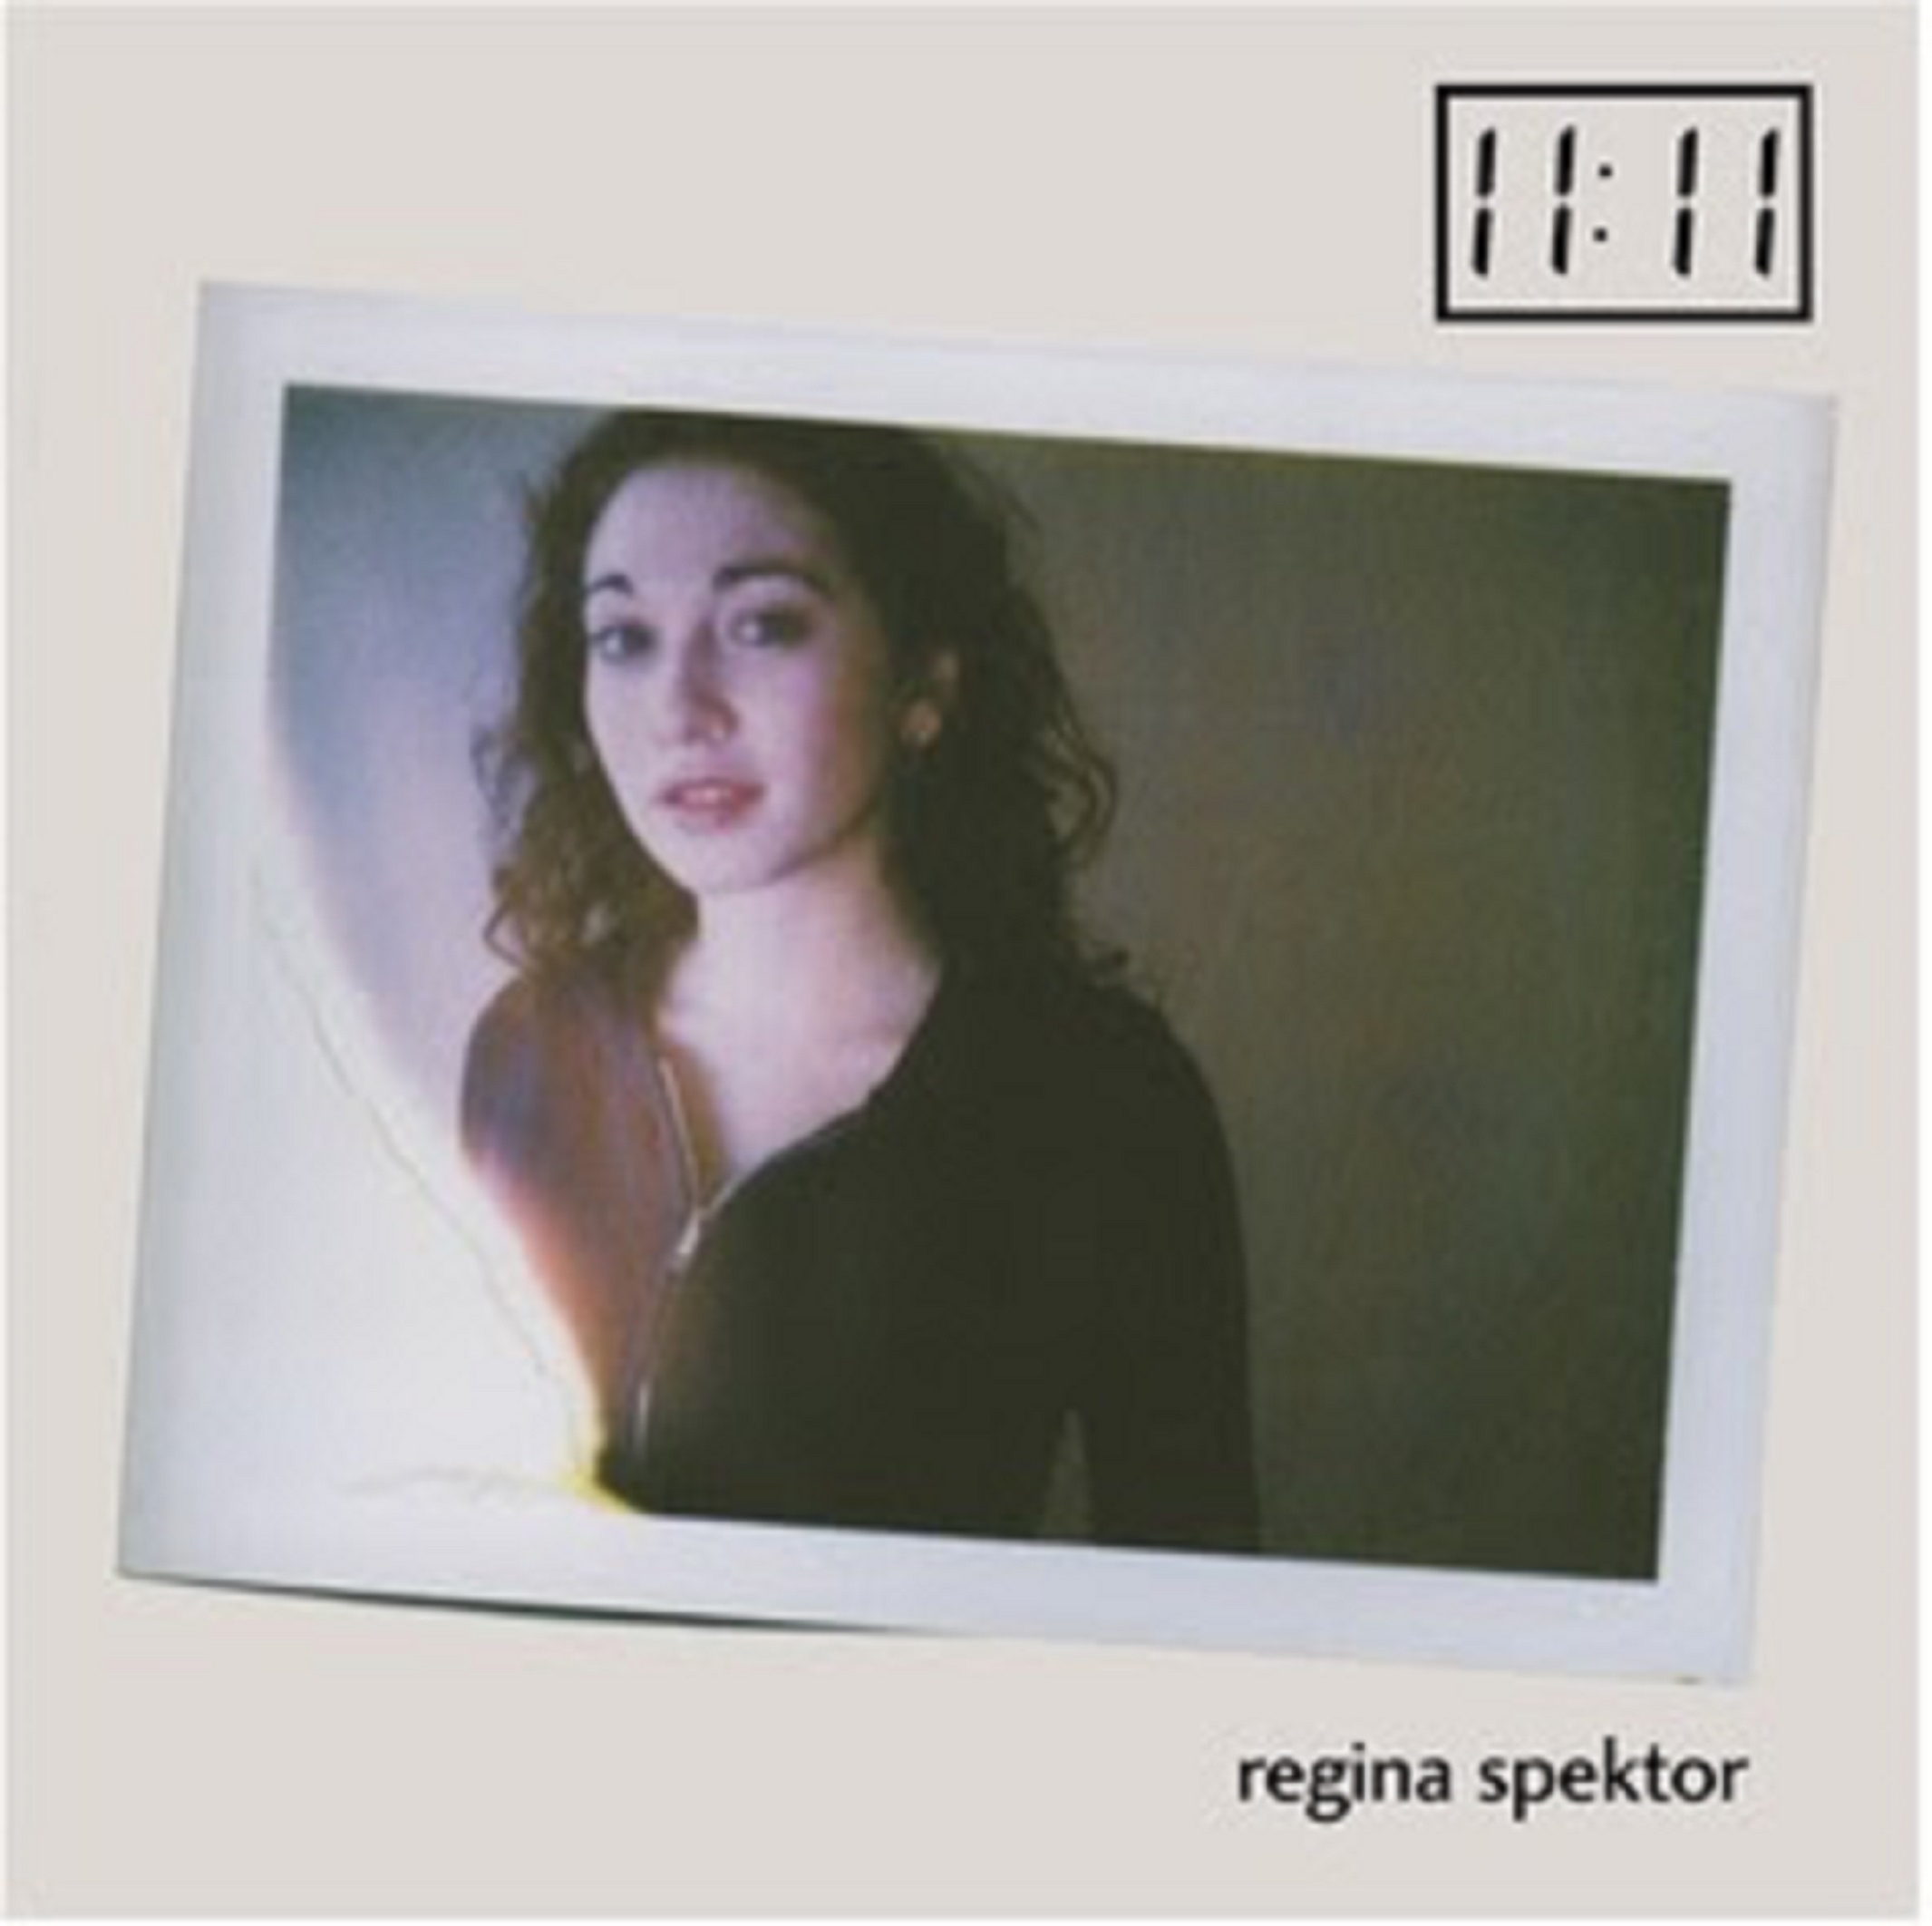 Regina Spektor's '11:11' special edition box set out 8/26 in celebration of 20th Anniversary